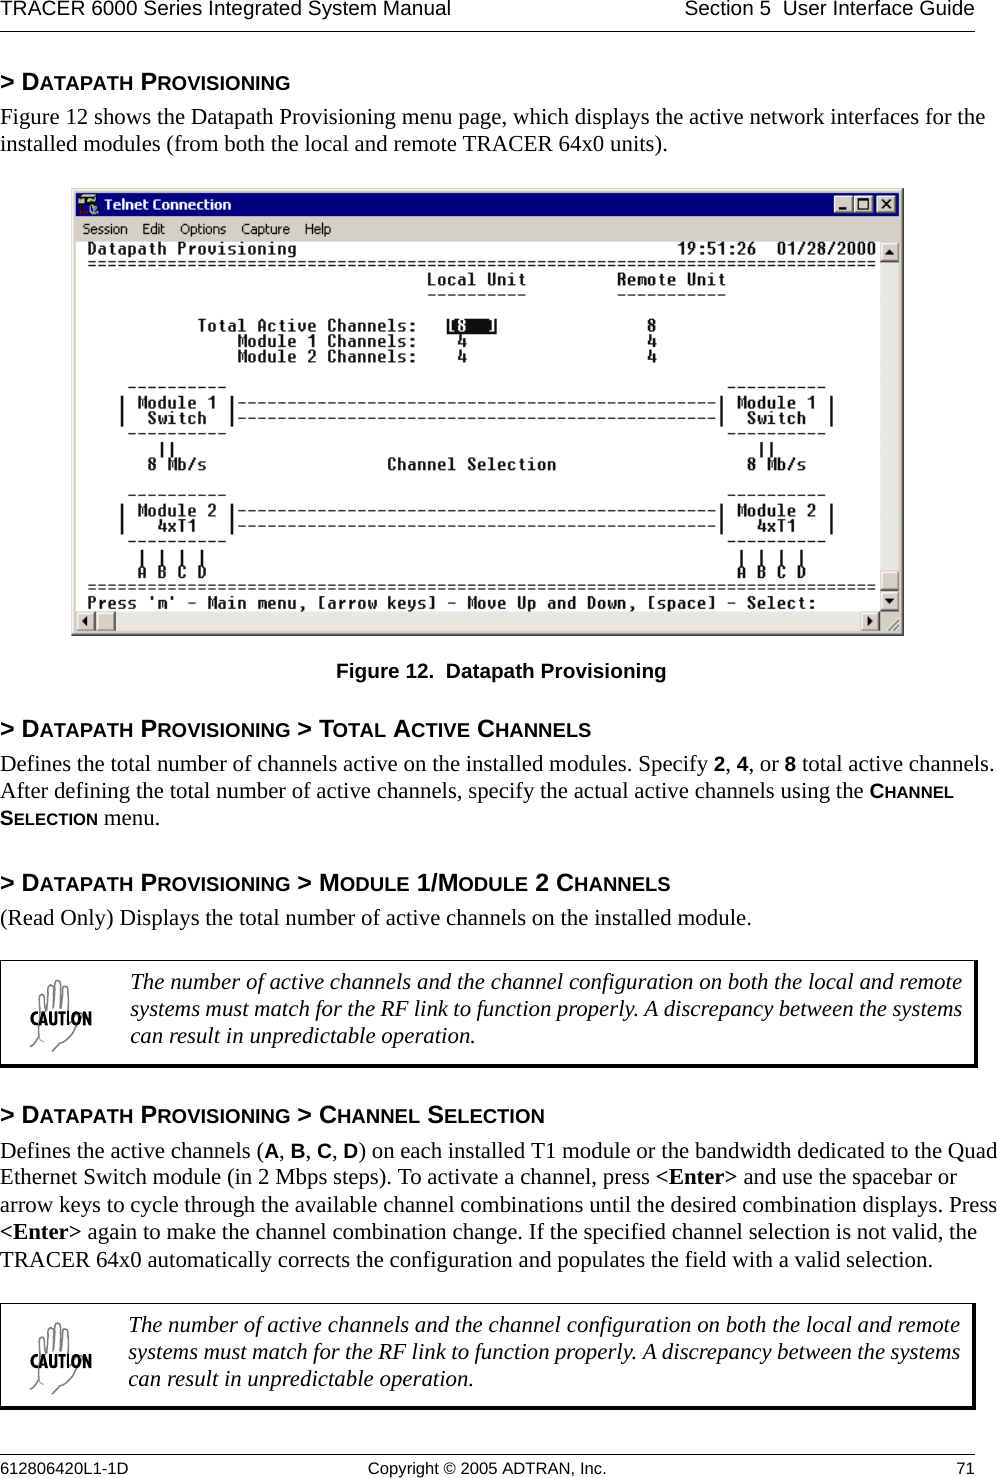 TRACER 6000 Series Integrated System Manual Section 5  User Interface Guide612806420L1-1D Copyright © 2005 ADTRAN, Inc. 71&gt; DATAPATH PROVISIONINGFigure 12 shows the Datapath Provisioning menu page, which displays the active network interfaces for the installed modules (from both the local and remote TRACER 64x0 units). Figure 12.  Datapath Provisioning&gt; DATAPATH PROVISIONING &gt; TOTAL ACTIVE CHANNELSDefines the total number of channels active on the installed modules. Specify 2, 4, or 8 total active channels. After defining the total number of active channels, specify the actual active channels using the CHANNEL SELECTION menu.&gt; DATAPATH PROVISIONING &gt; MODULE 1/MODULE 2 CHANNELS(Read Only) Displays the total number of active channels on the installed module.&gt; DATAPATH PROVISIONING &gt; CHANNEL SELECTIONDefines the active channels (A, B, C, D) on each installed T1 module or the bandwidth dedicated to the Quad Ethernet Switch module (in 2 Mbps steps). To activate a channel, press &lt;Enter&gt; and use the spacebar or arrow keys to cycle through the available channel combinations until the desired combination displays. Press &lt;Enter&gt; again to make the channel combination change. If the specified channel selection is not valid, the TRACER 64x0 automatically corrects the configuration and populates the field with a valid selection.The number of active channels and the channel configuration on both the local and remote systems must match for the RF link to function properly. A discrepancy between the systems can result in unpredictable operation.The number of active channels and the channel configuration on both the local and remote systems must match for the RF link to function properly. A discrepancy between the systems can result in unpredictable operation.